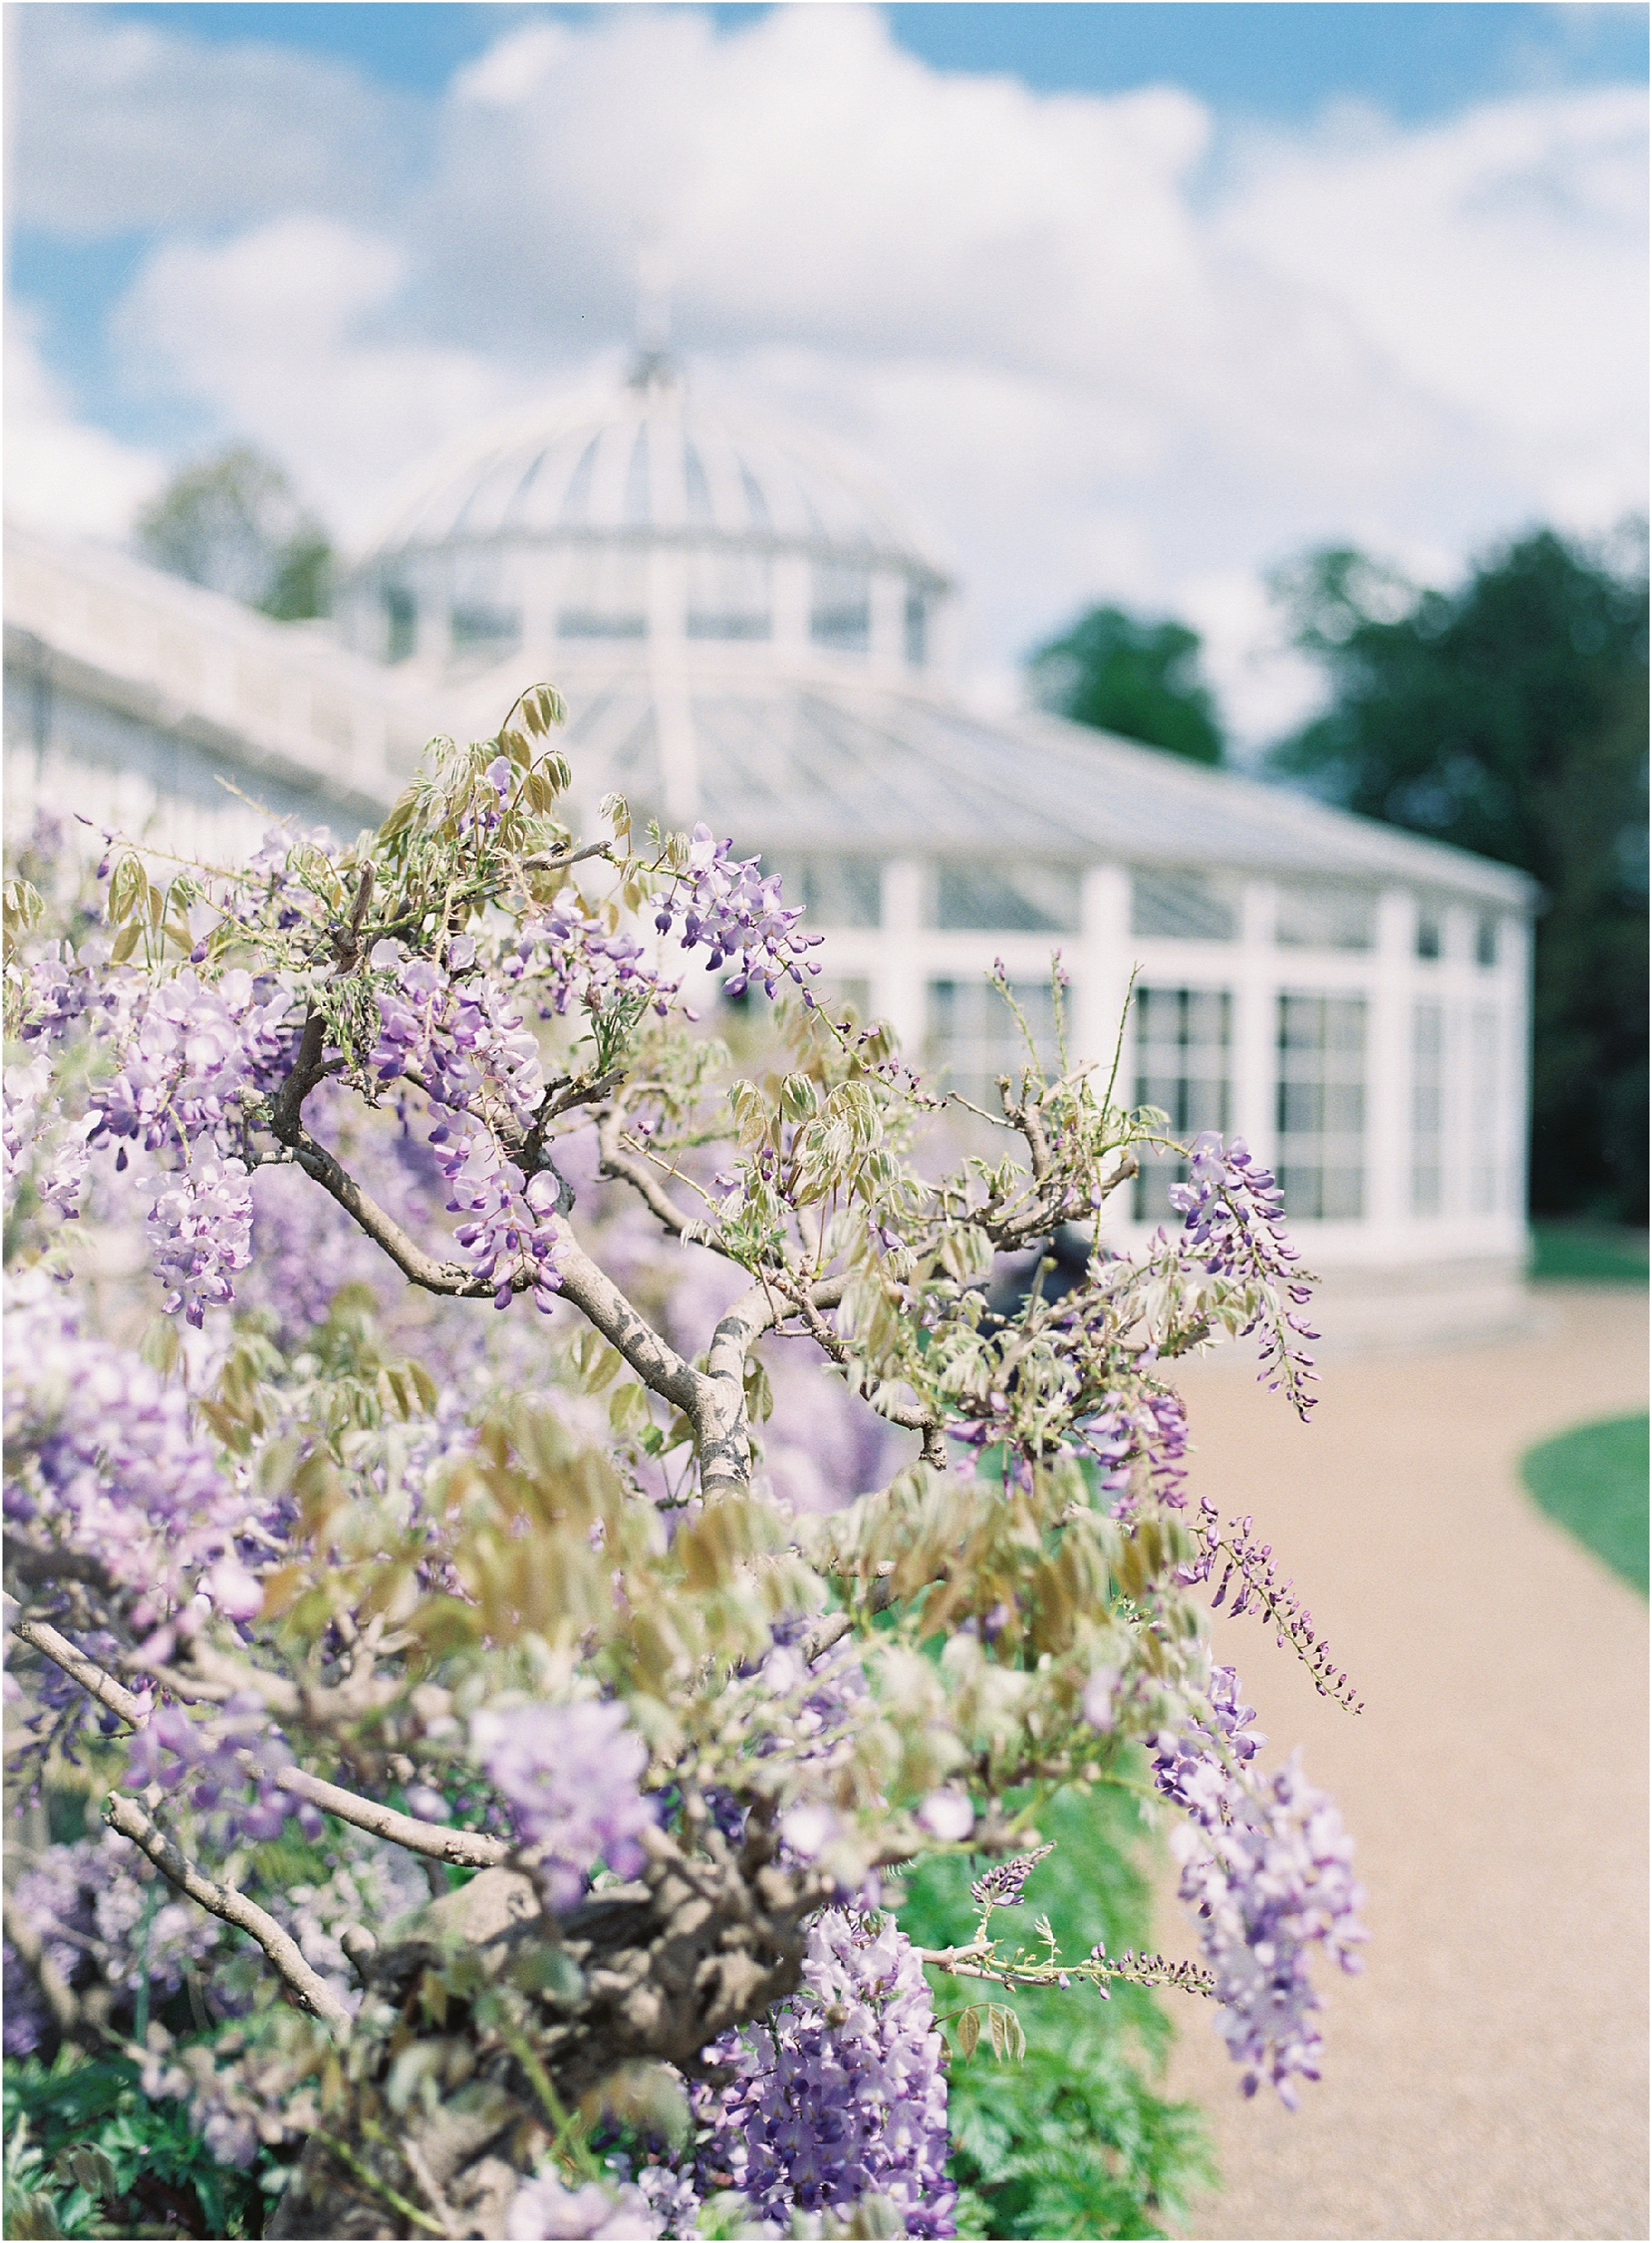 Wisteria blooming outside The Orangery at Chiswick House